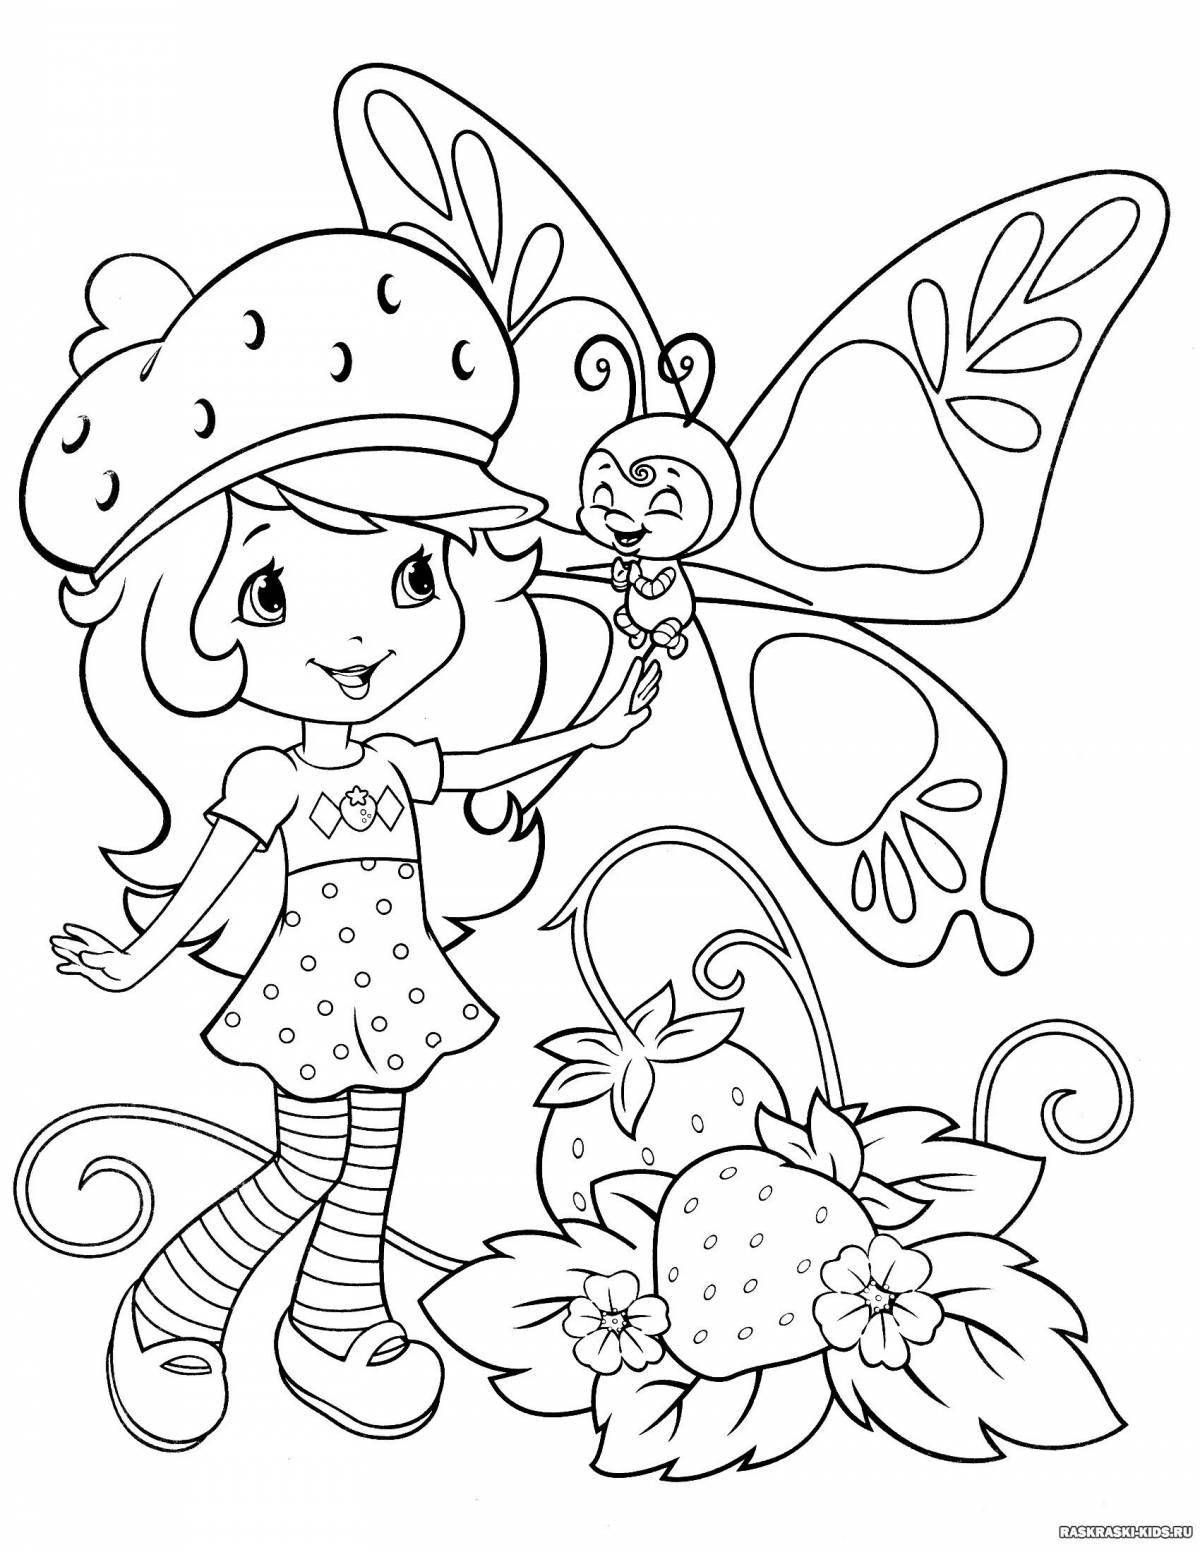 Dreamy coloring for girls 6-7 years old